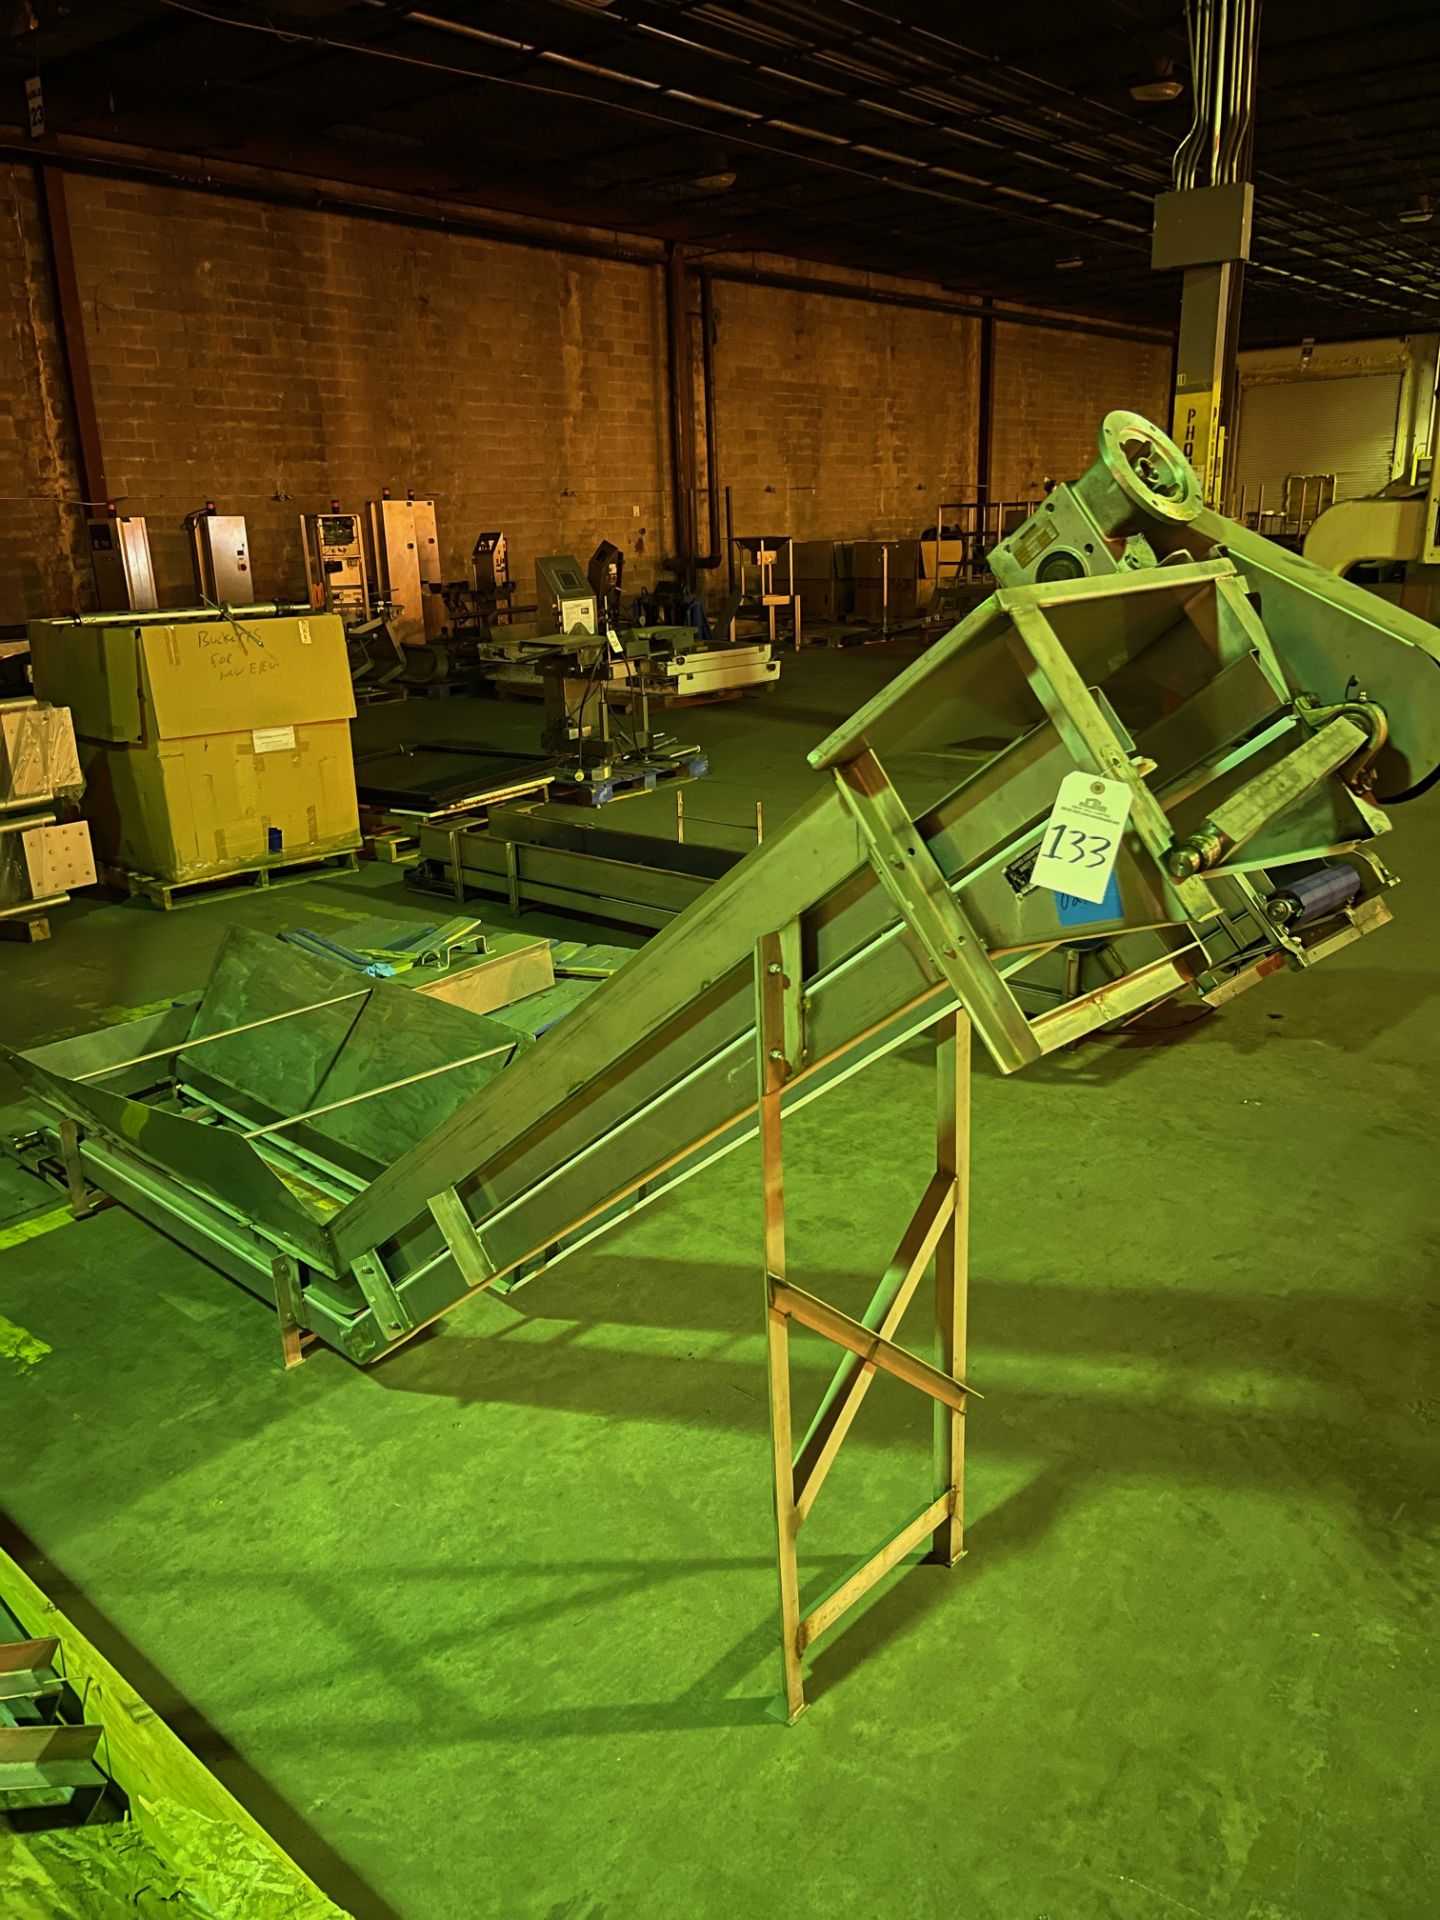 Lot of (2) Idaho Equipment Conveyors, (1) with Hopper (Not in Use) | Rig Fee $350